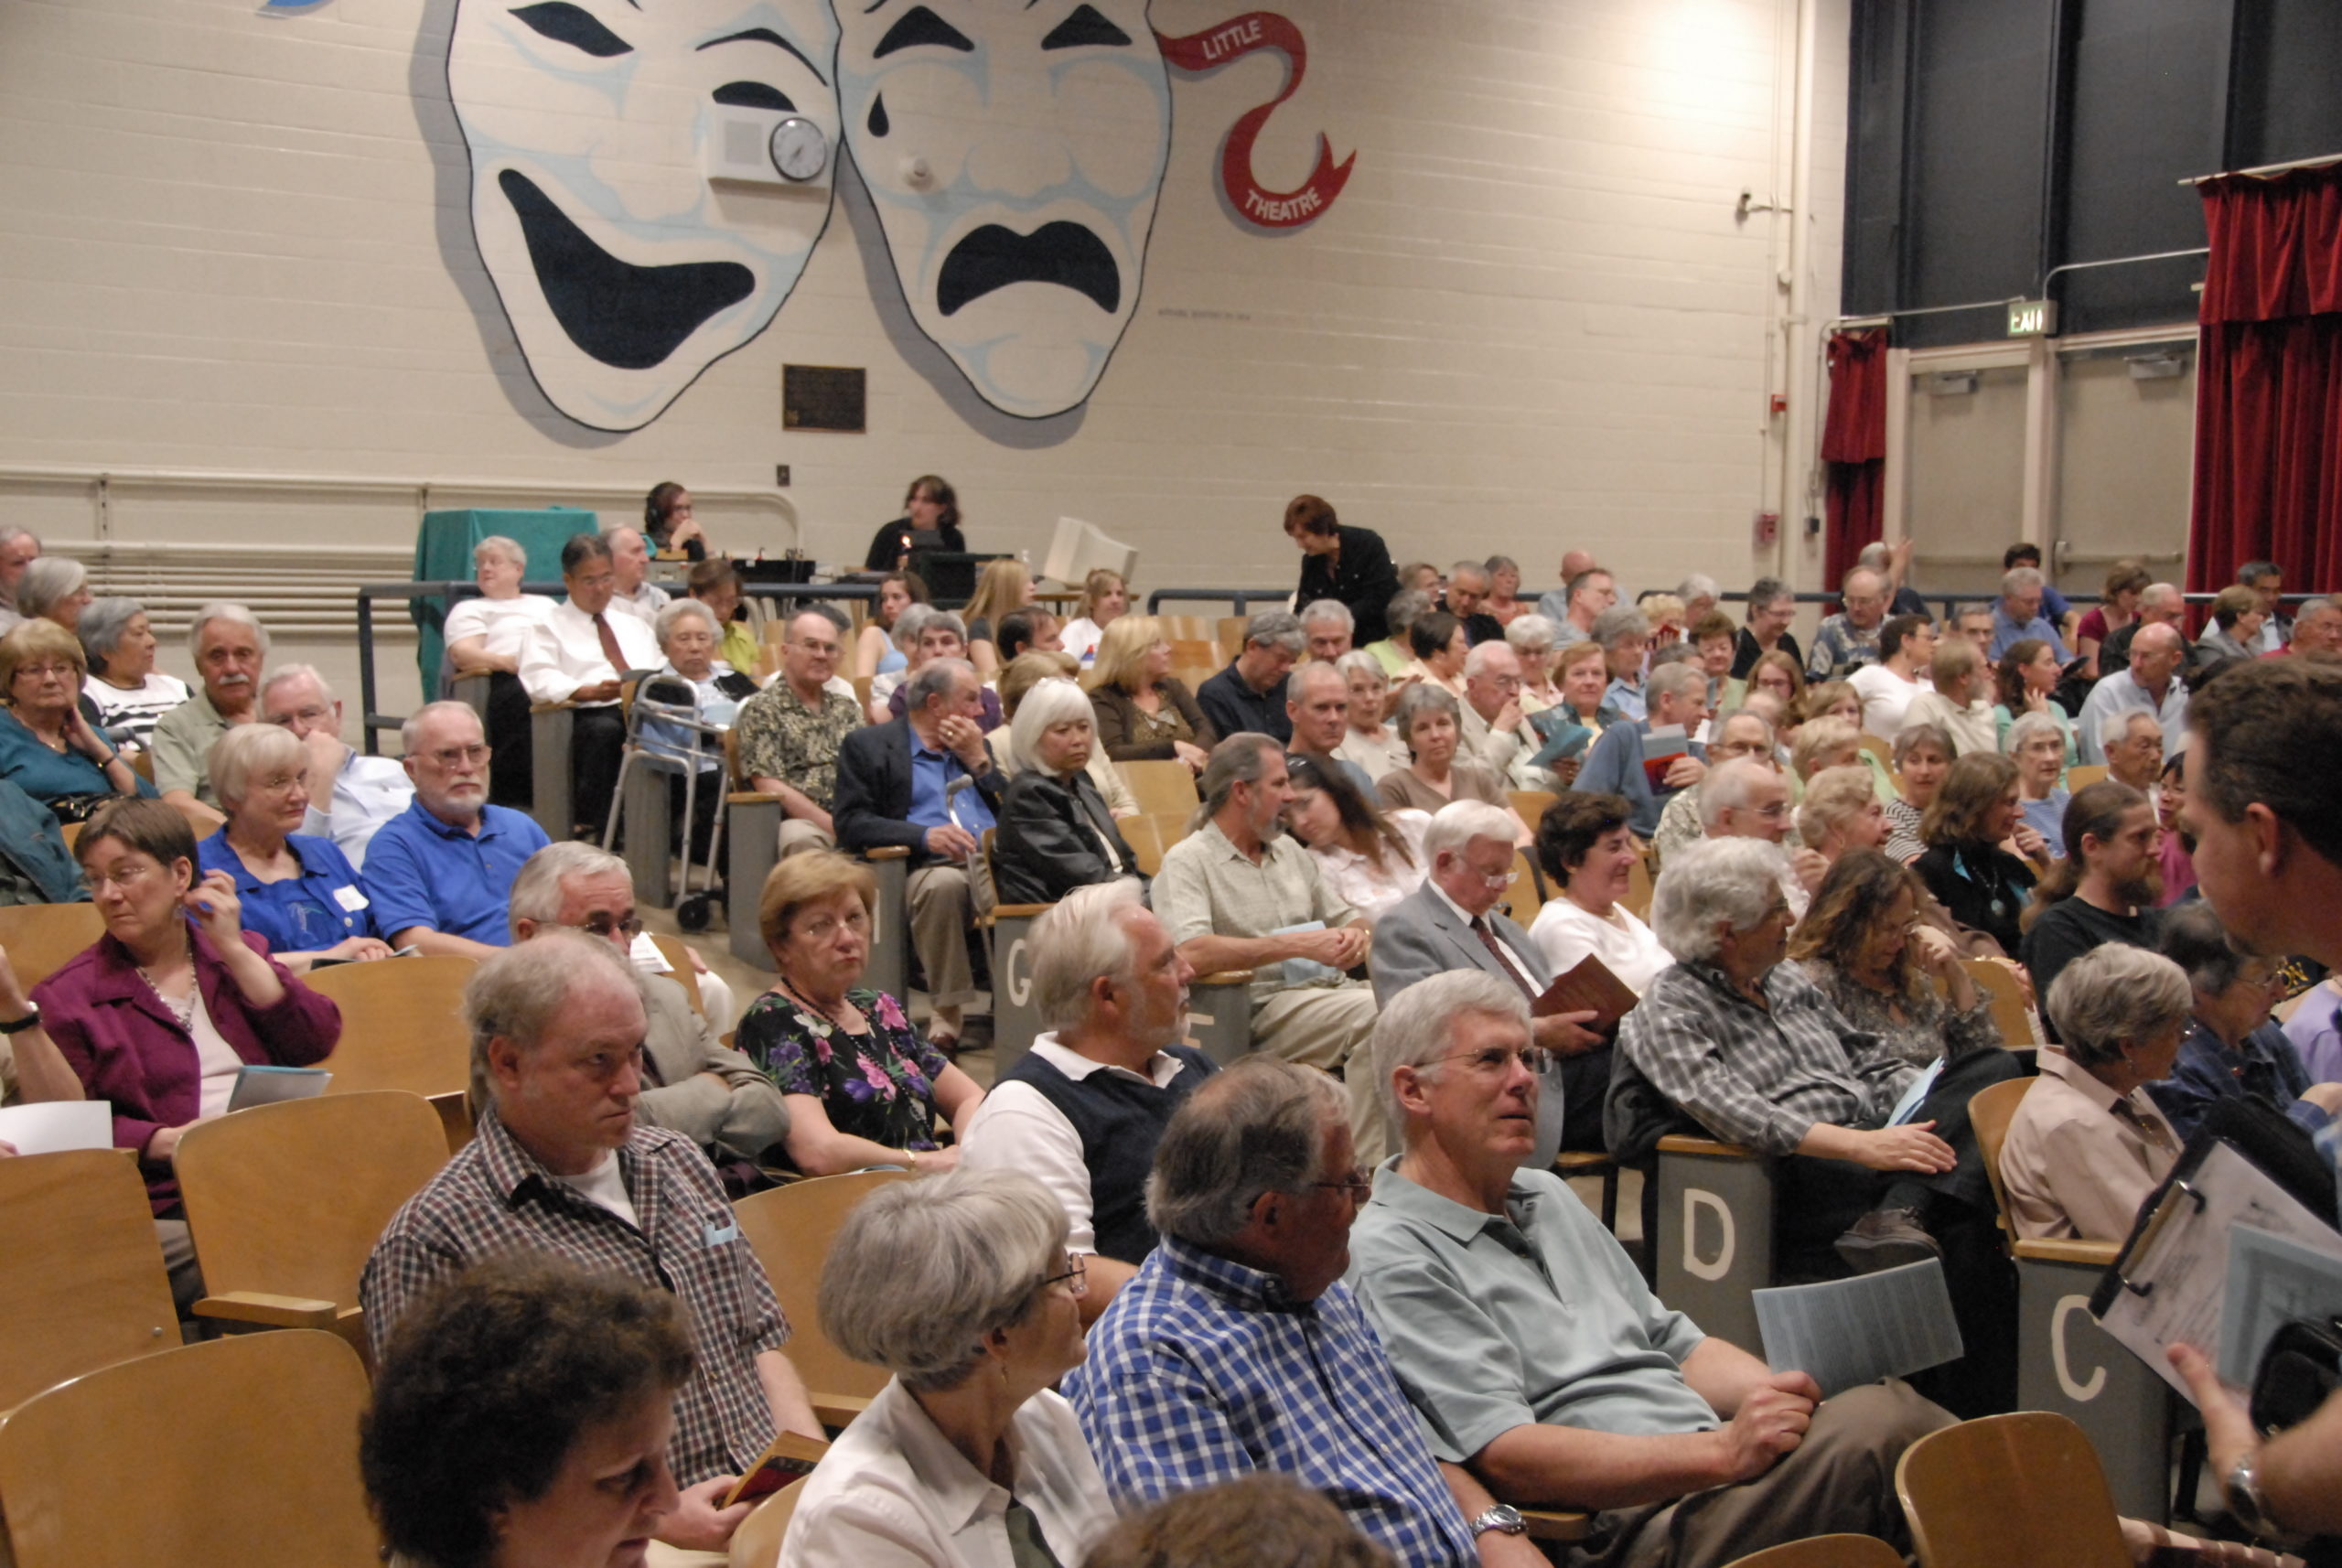 audience gathers for San Mateo plays